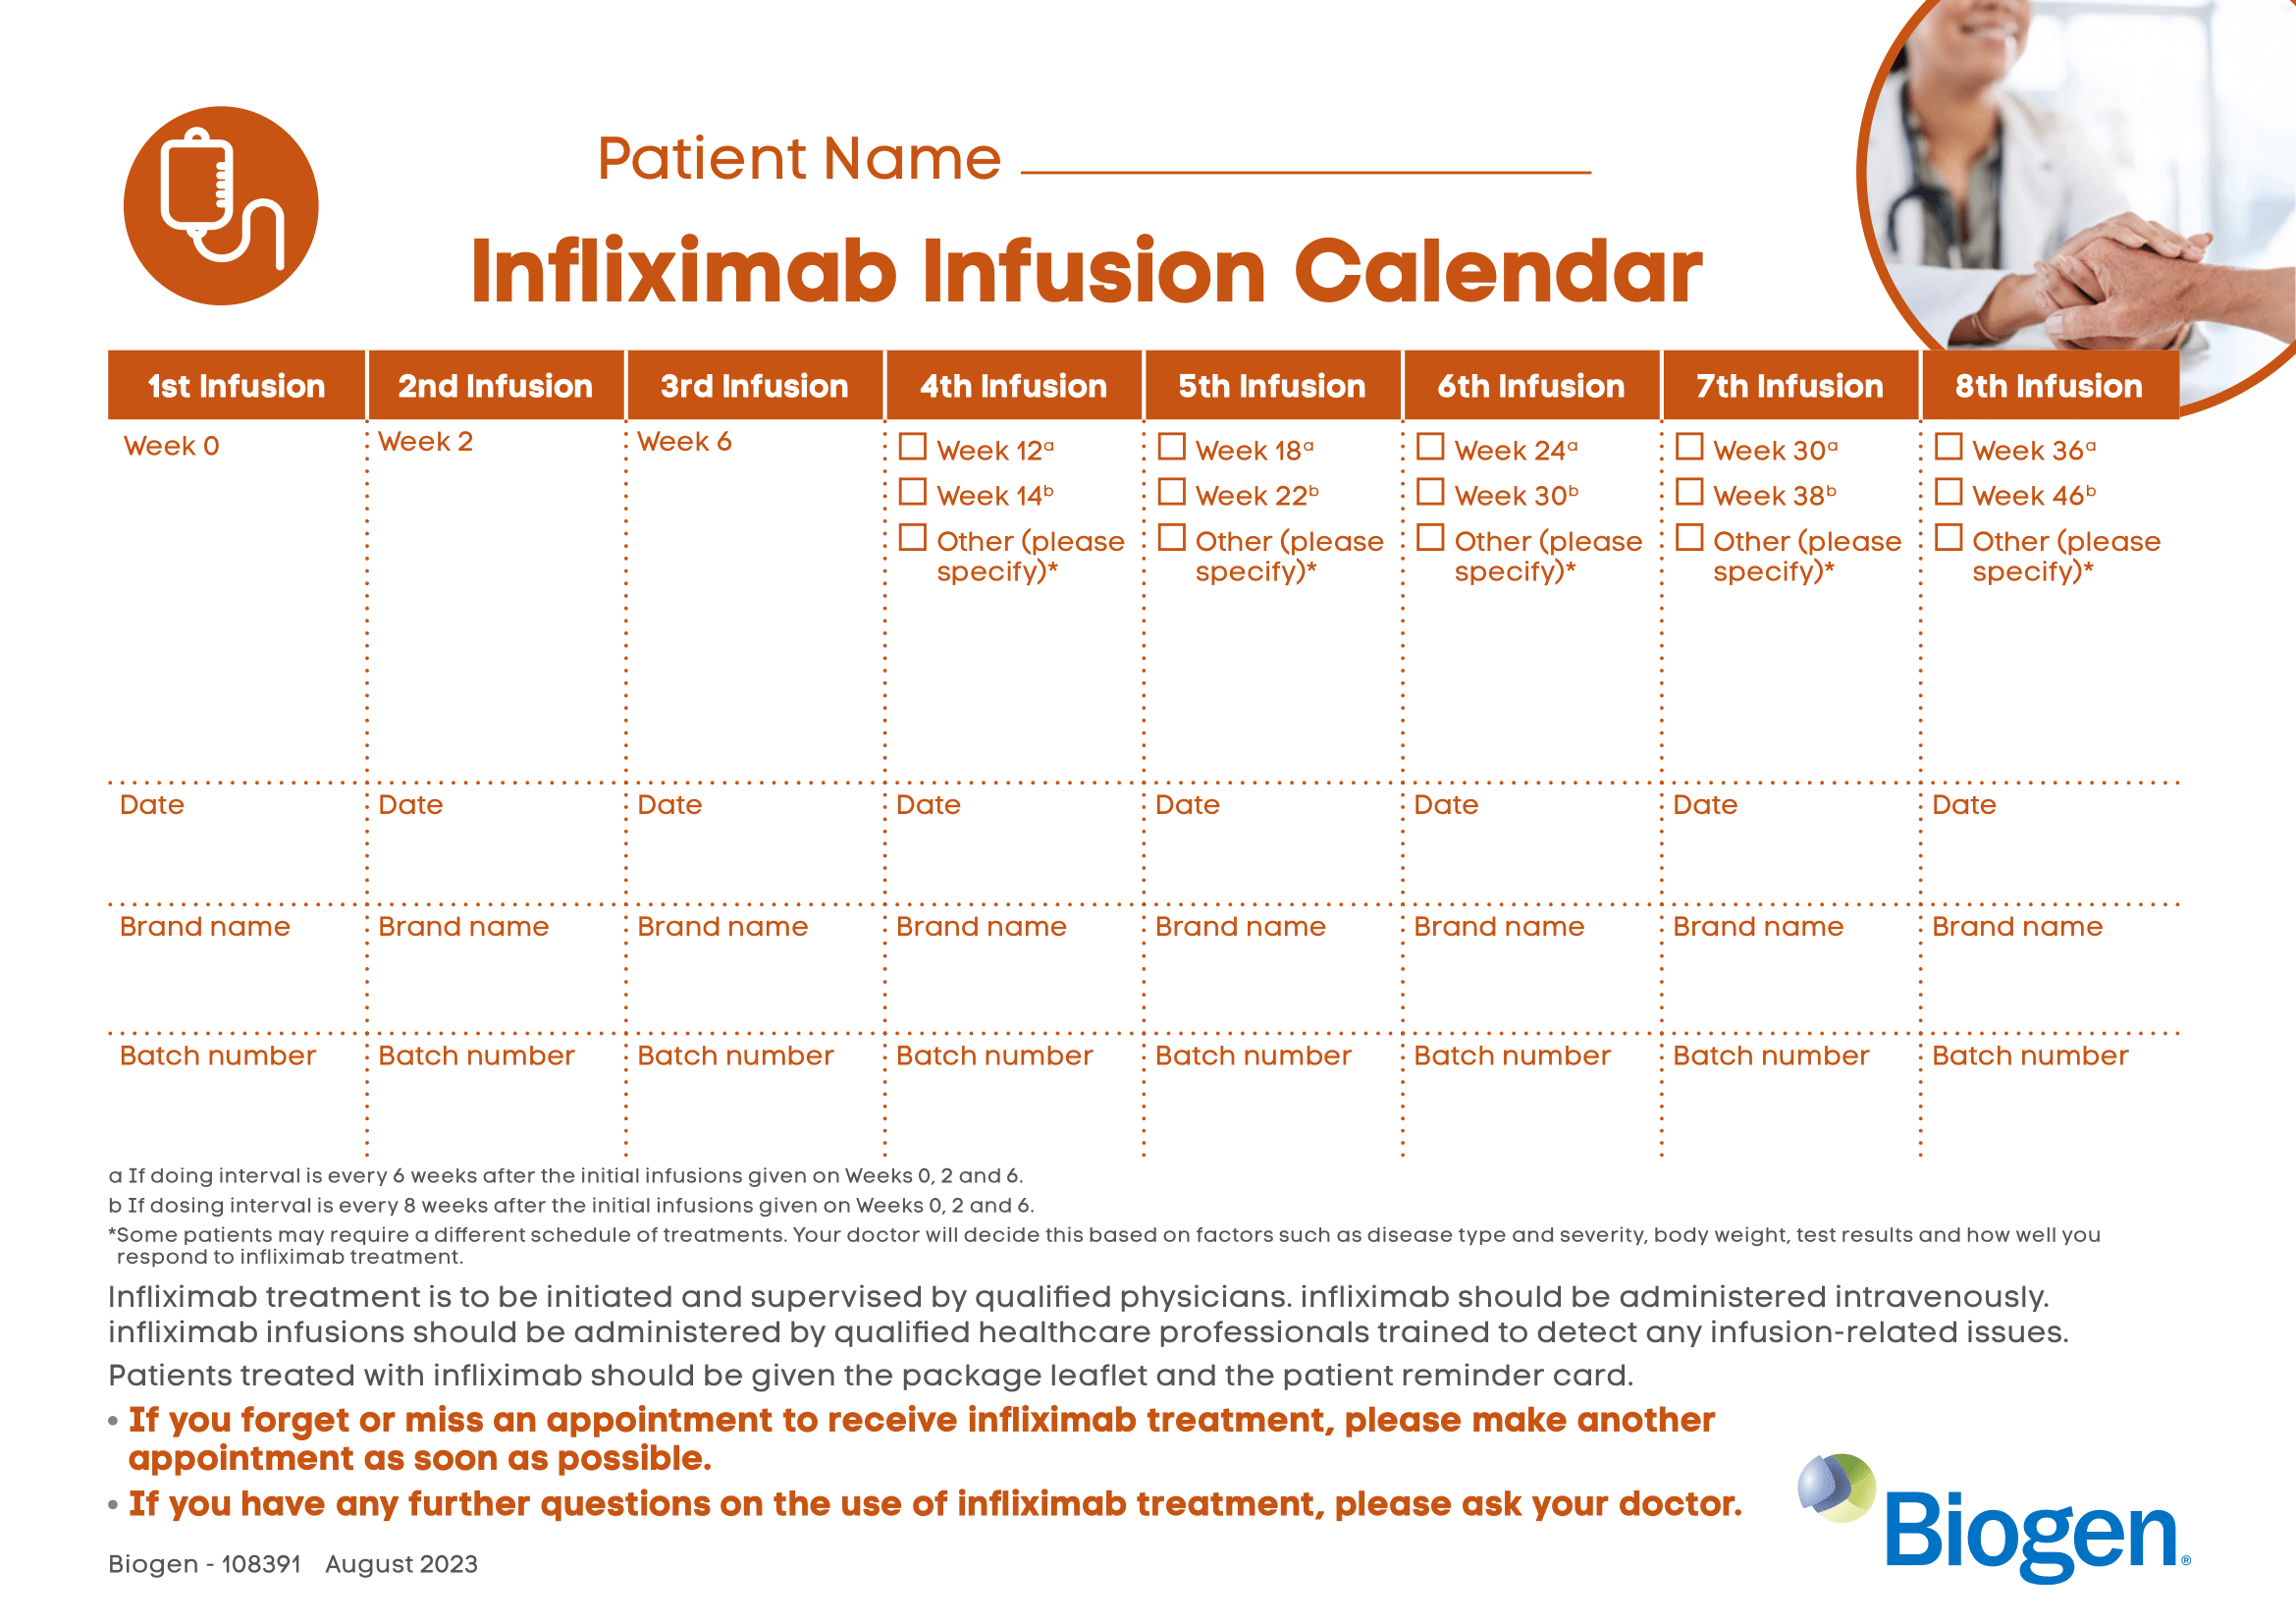 infusion scheduler infliximab